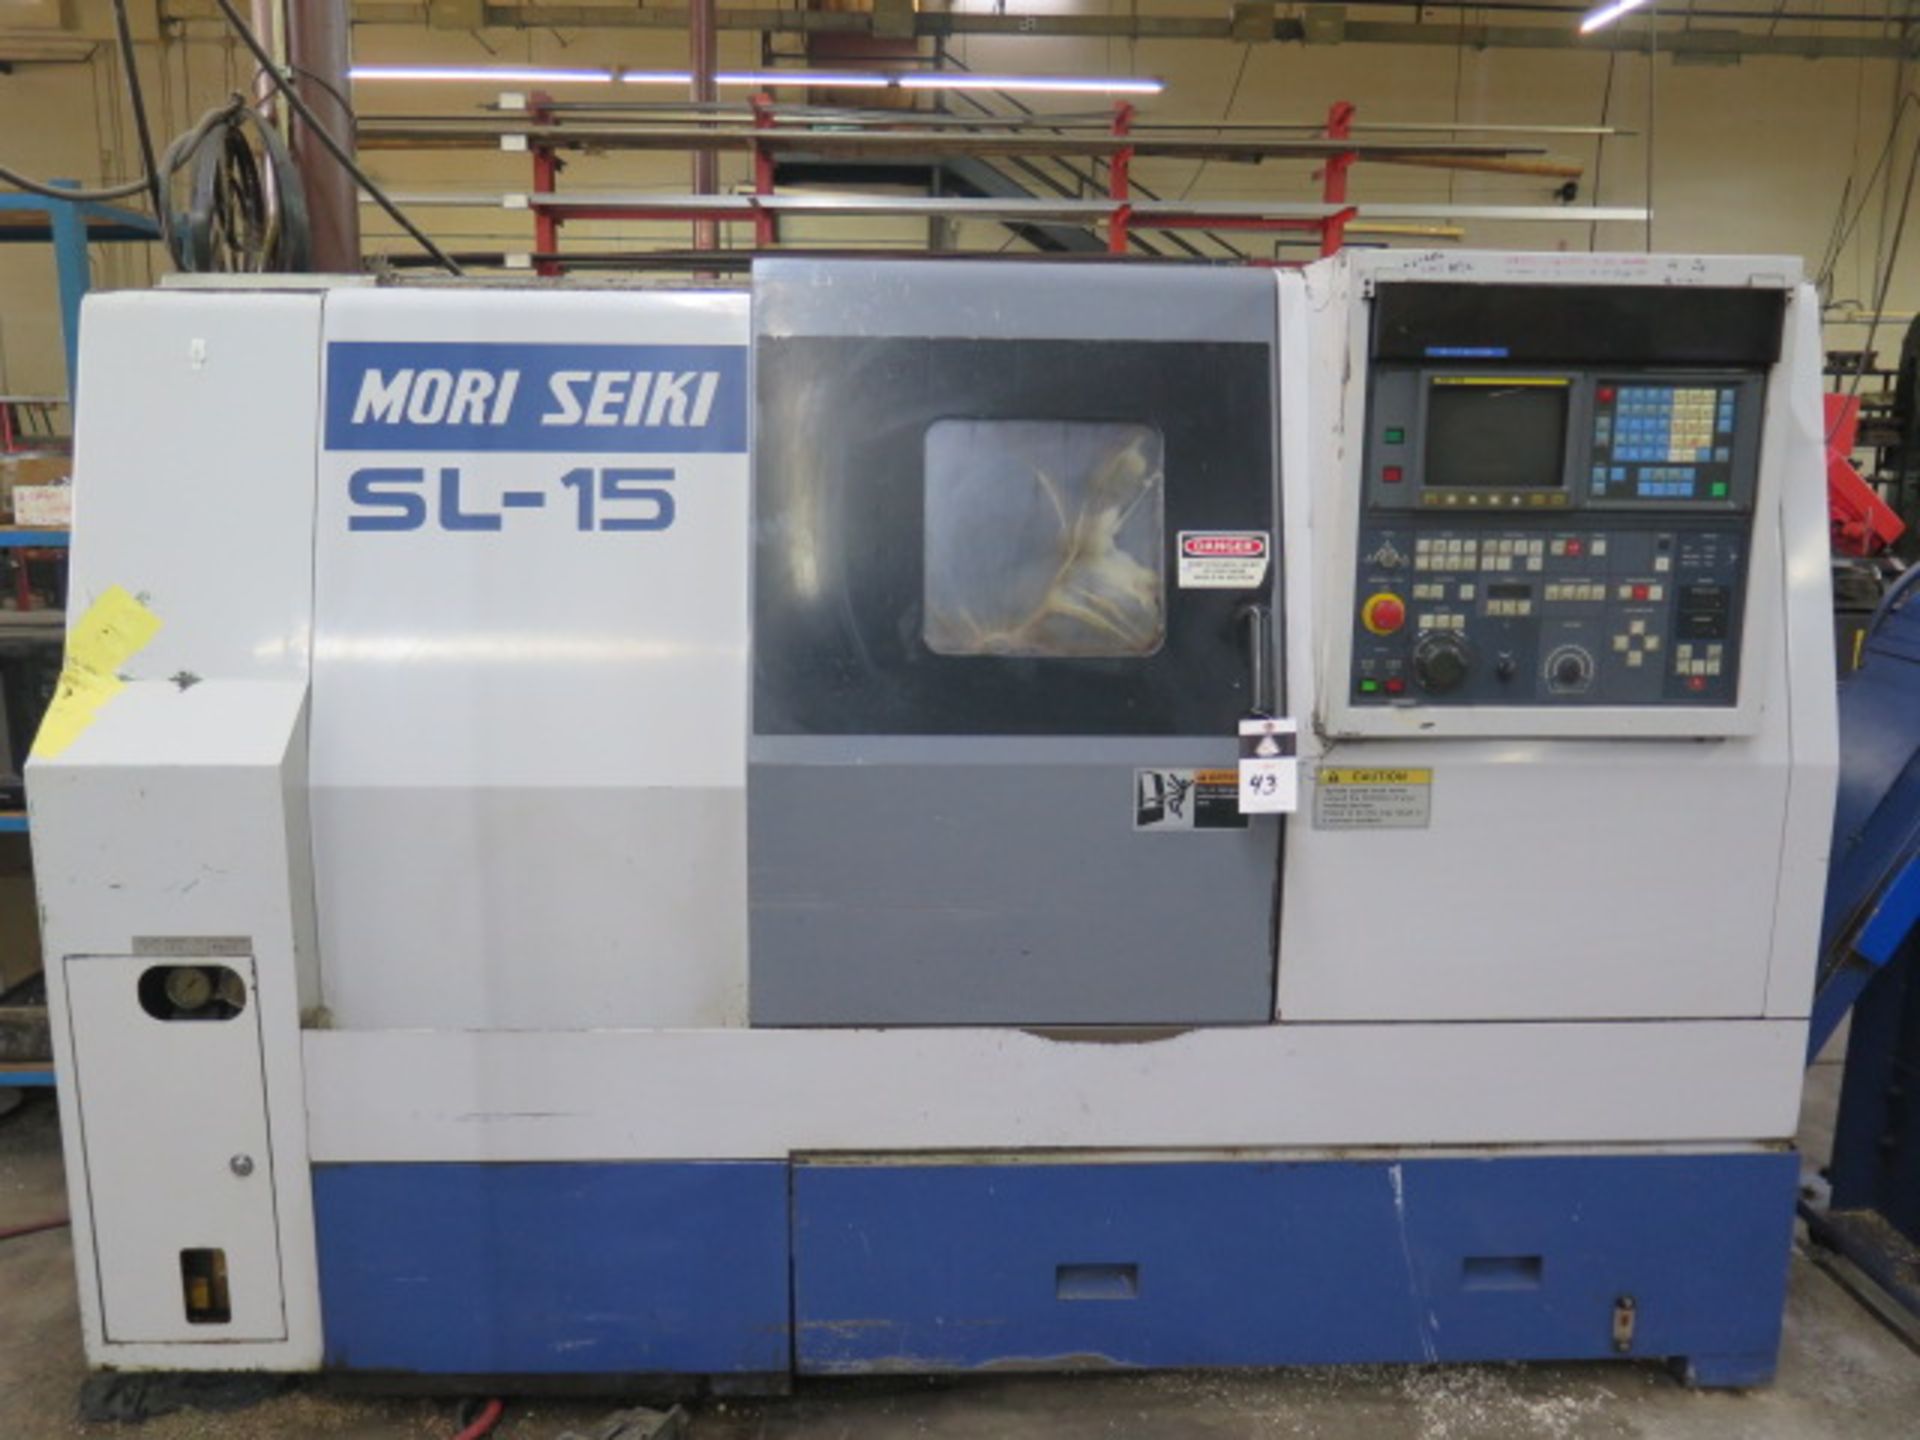 Mori Seiki SL-15 CNC Turning Center s/n 1528 w/ Fanuc MF-T4 Controls, 12-Station Turret, SOLD AS IS